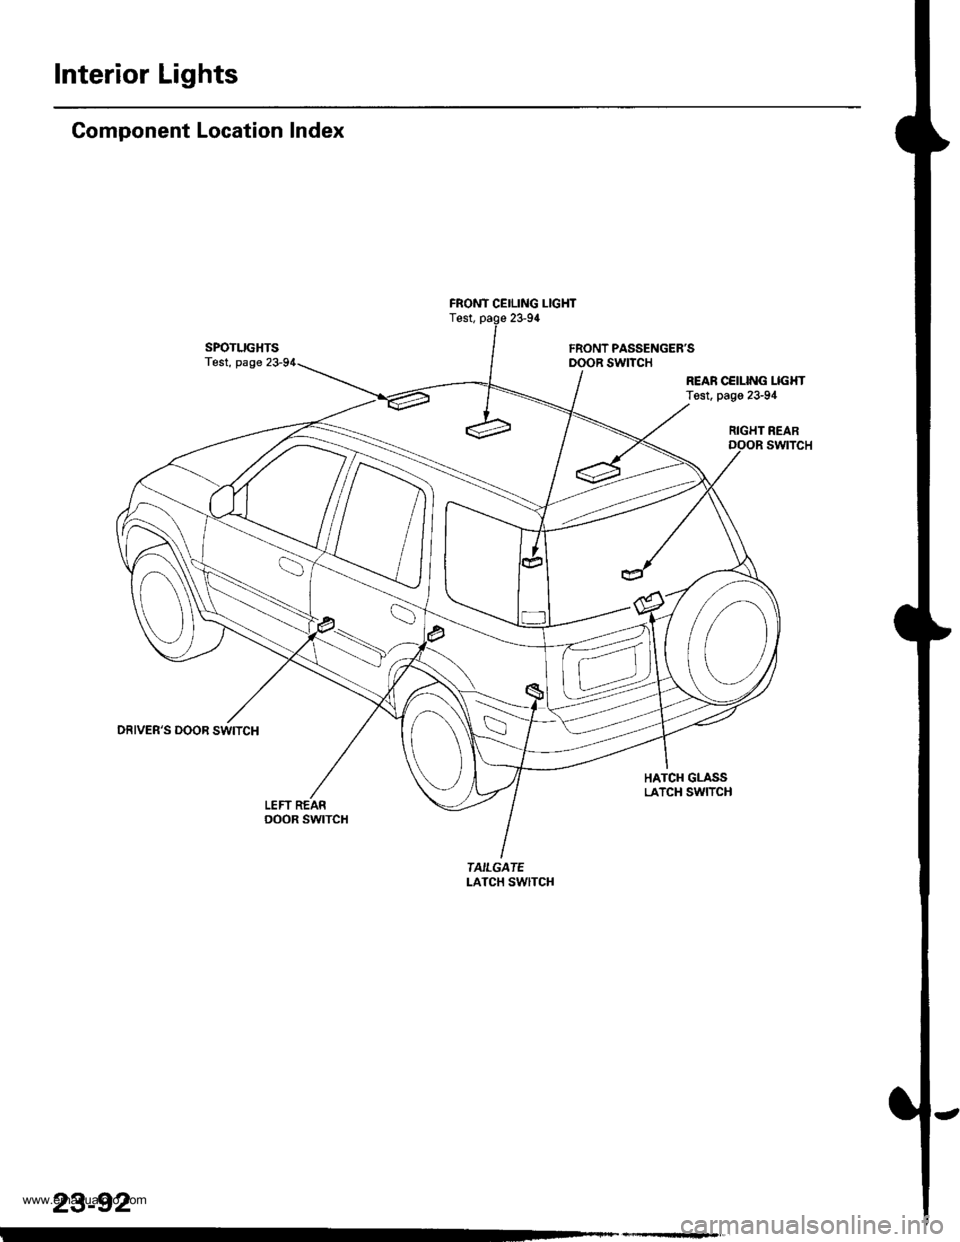 HONDA CR-V 2000 RD1-RD3 / 1.G User Guide 
Interior Lights
Component Location Index
SPOTLIGHTSTest, page
DRIVERS DOOR SWITCH
LEFT REARoooR swtTcH
FRONT CEILING LIGHTTest, page 23-94
FRONT PASSENGERSDOOR SWITCH
REAR CCILING LIGI{TTest, page 